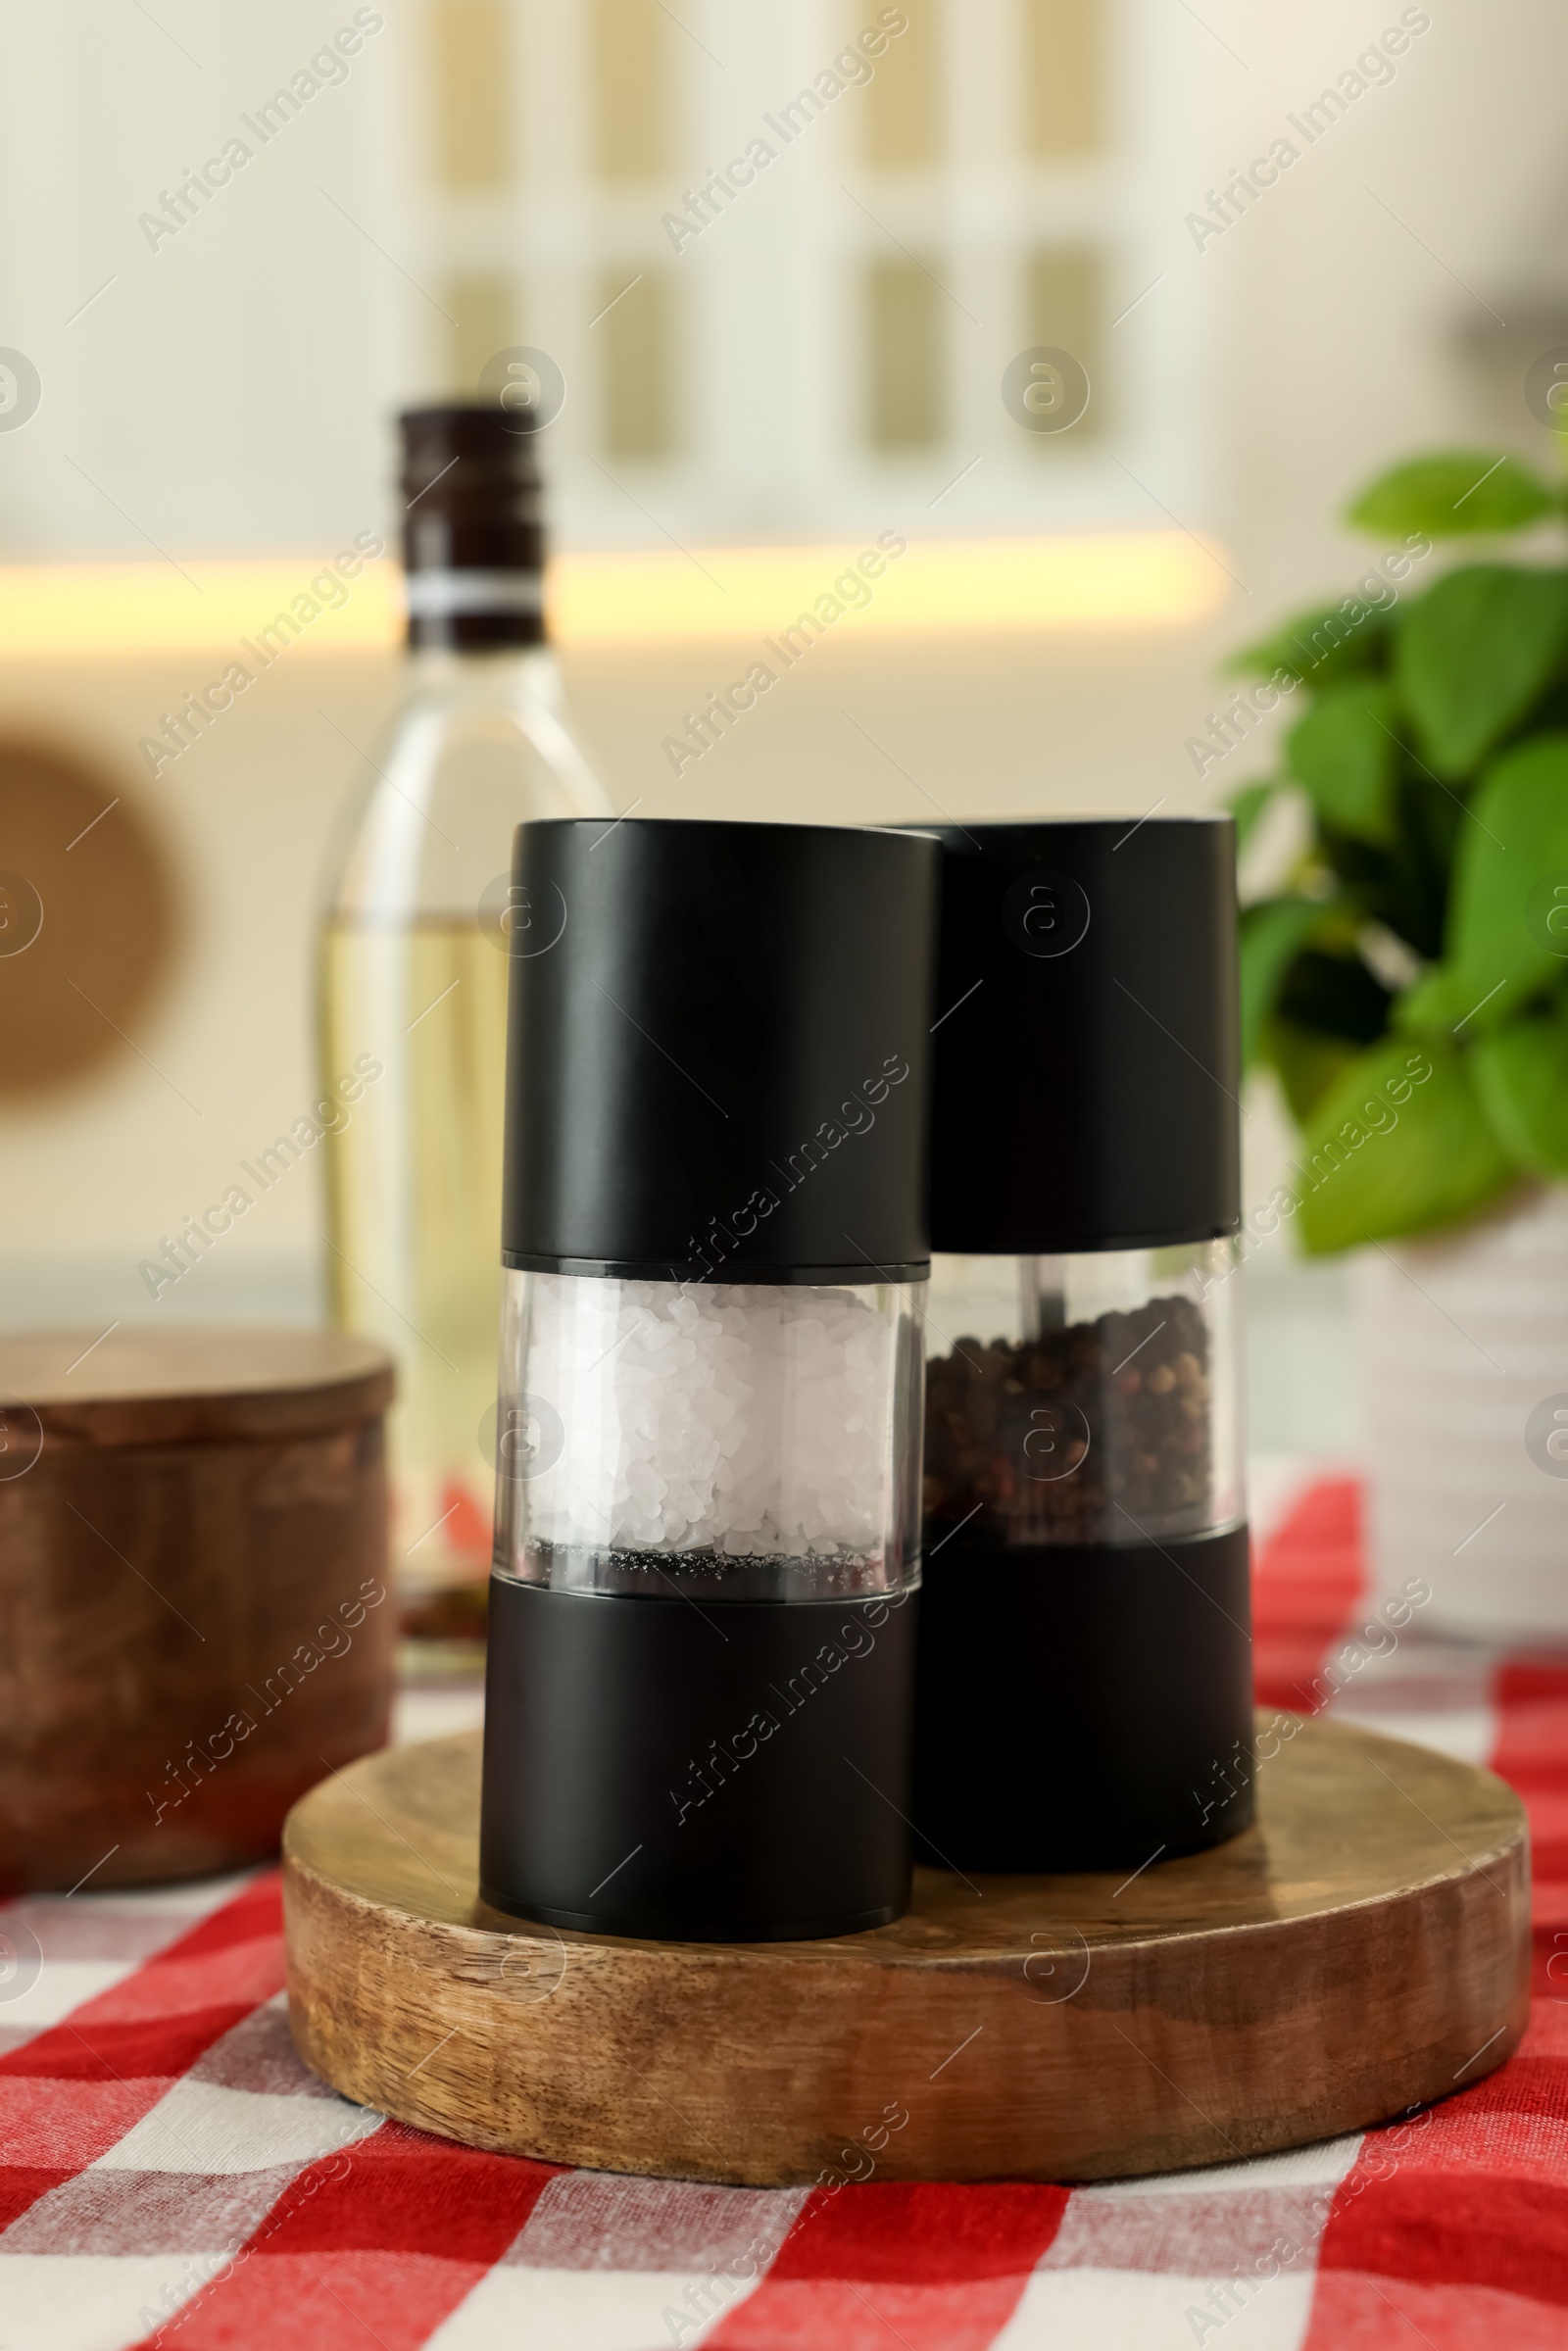 Photo of Salt and pepper shakers with bottle on table indoors